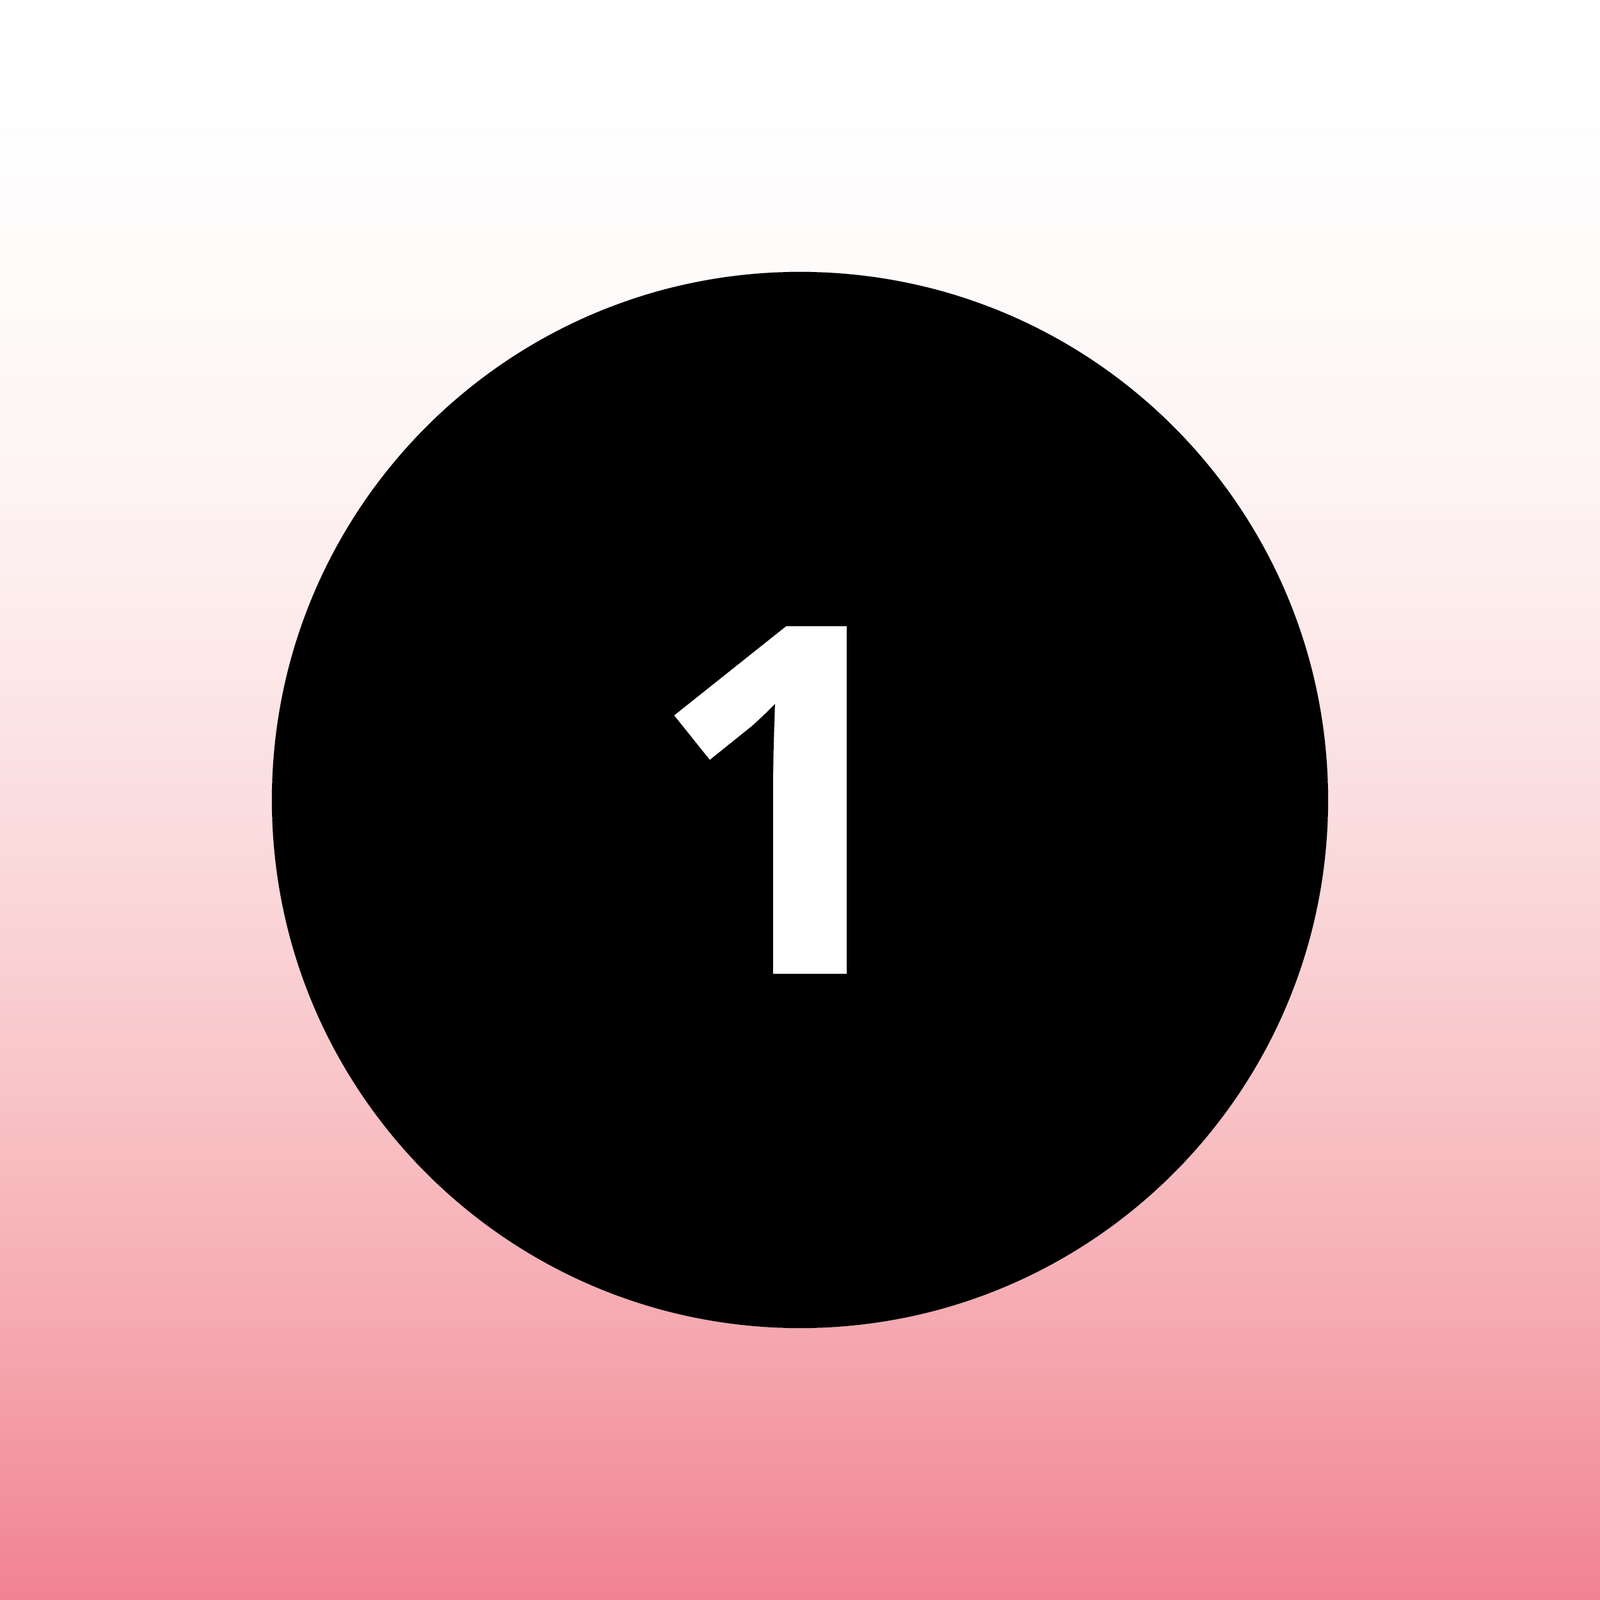 Number 1 with a black circle and a pink gradient.